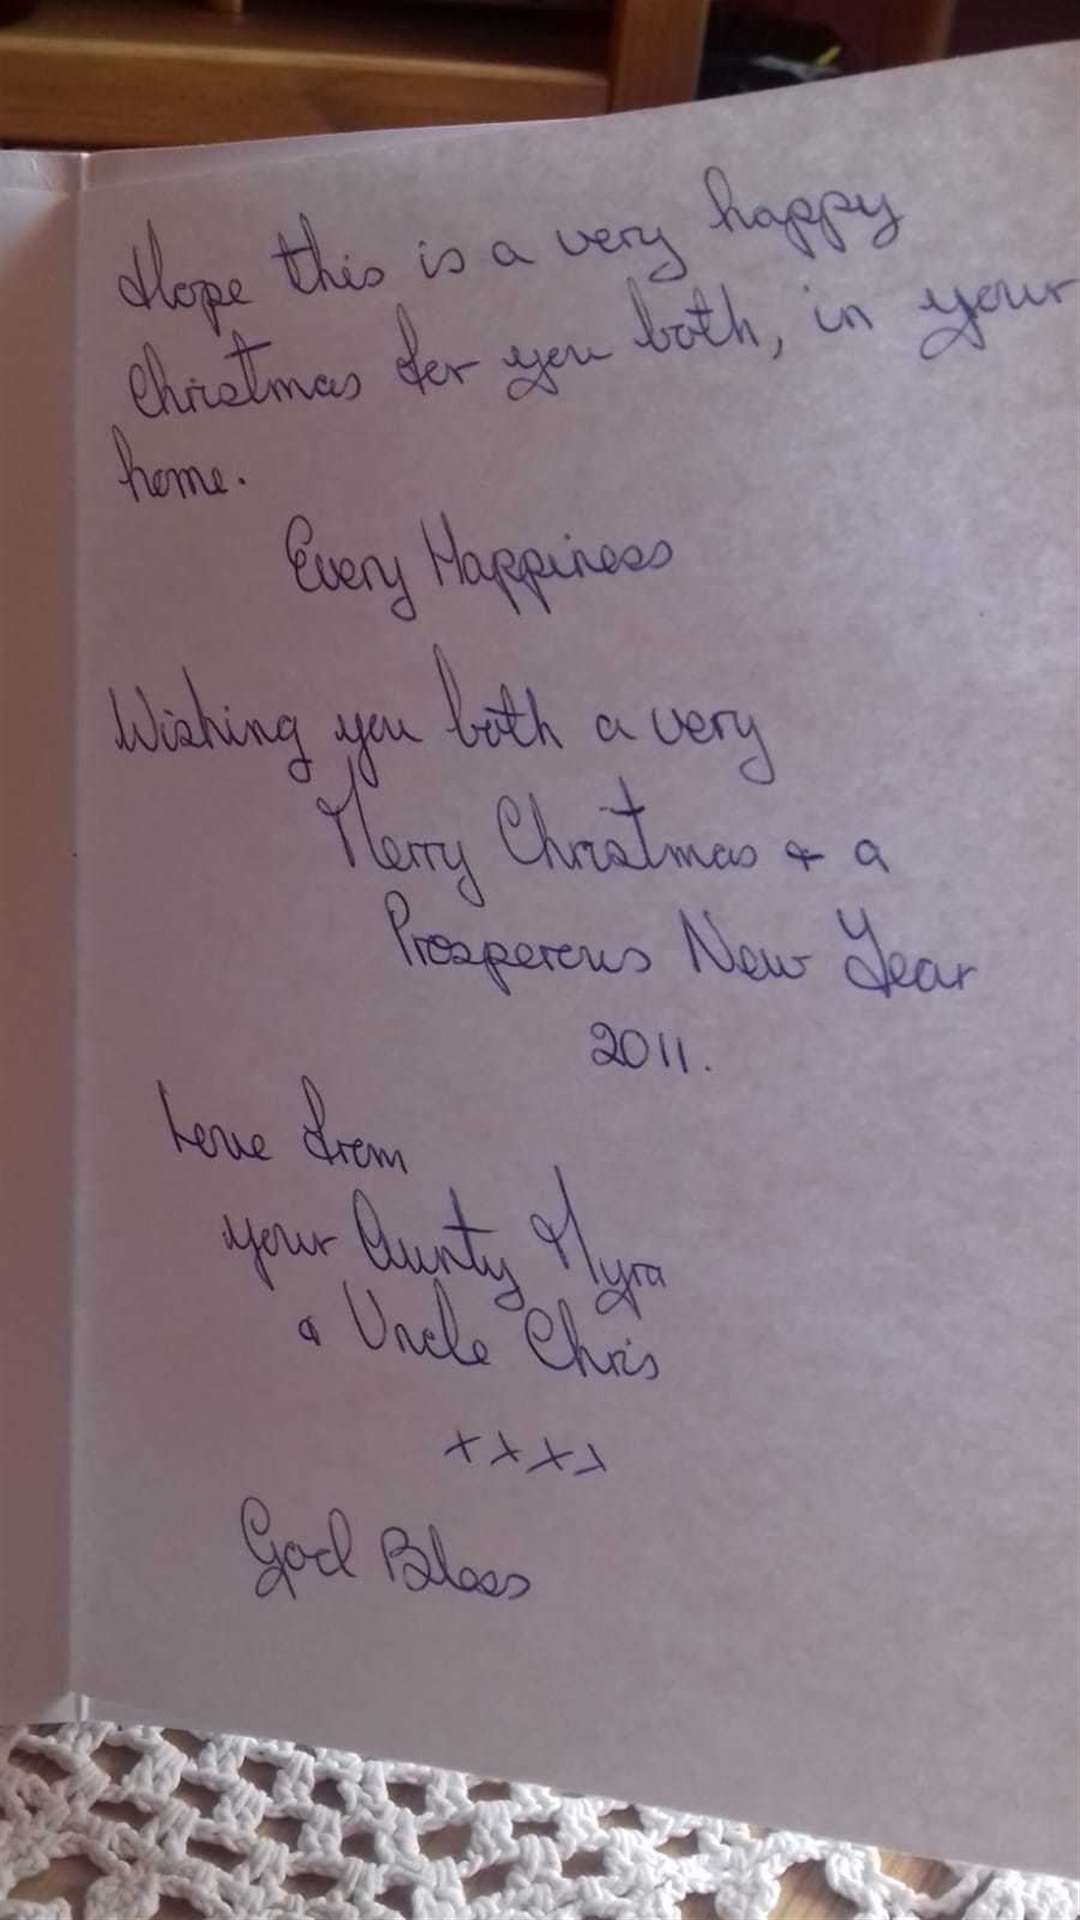 The card was sent in December 2010 (13038145)